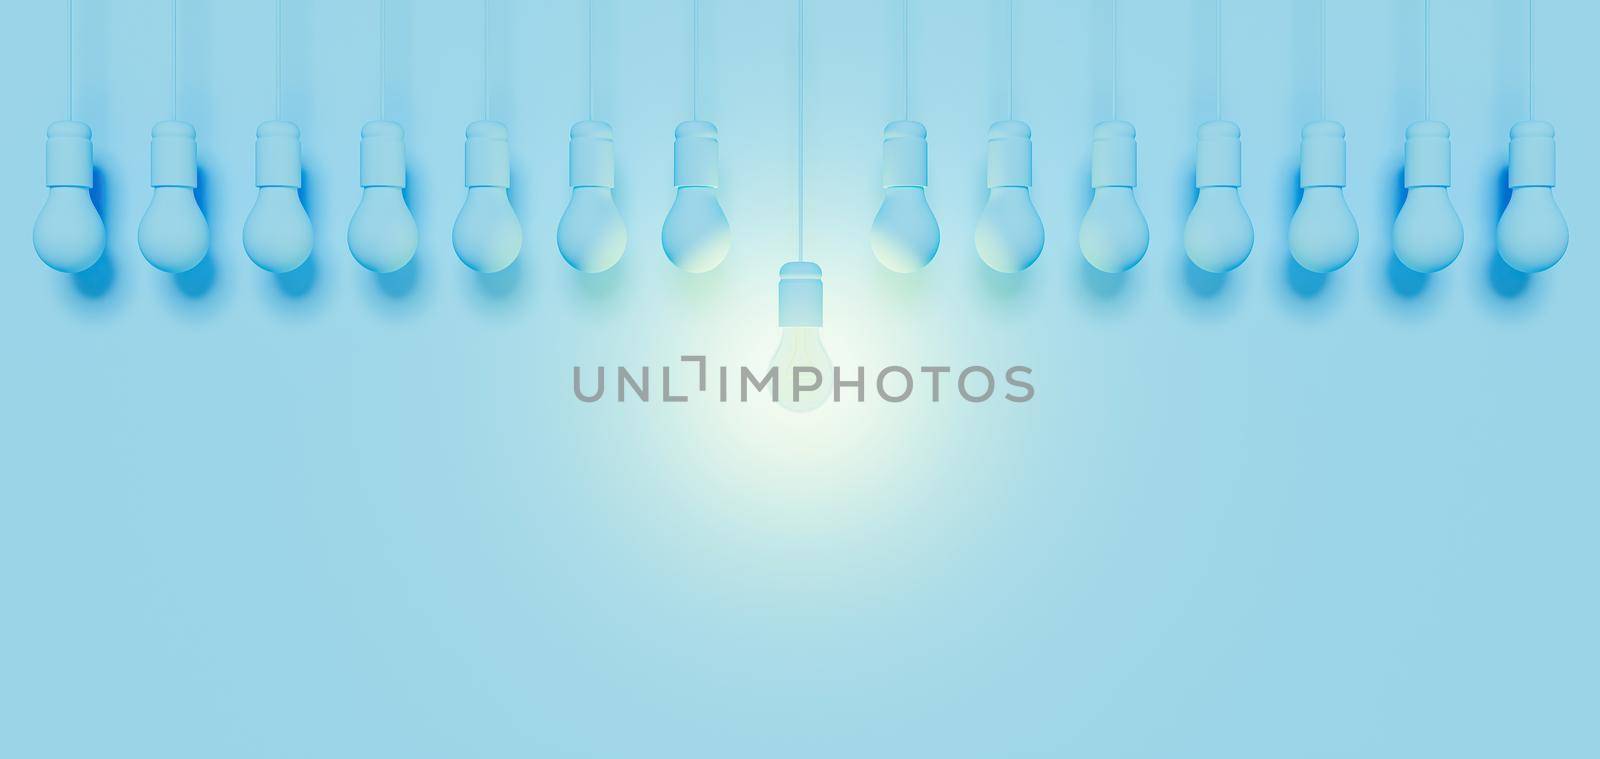 monochromatic banner with a line of blue bulbs and a central one illuminated with glass. 3d rendering